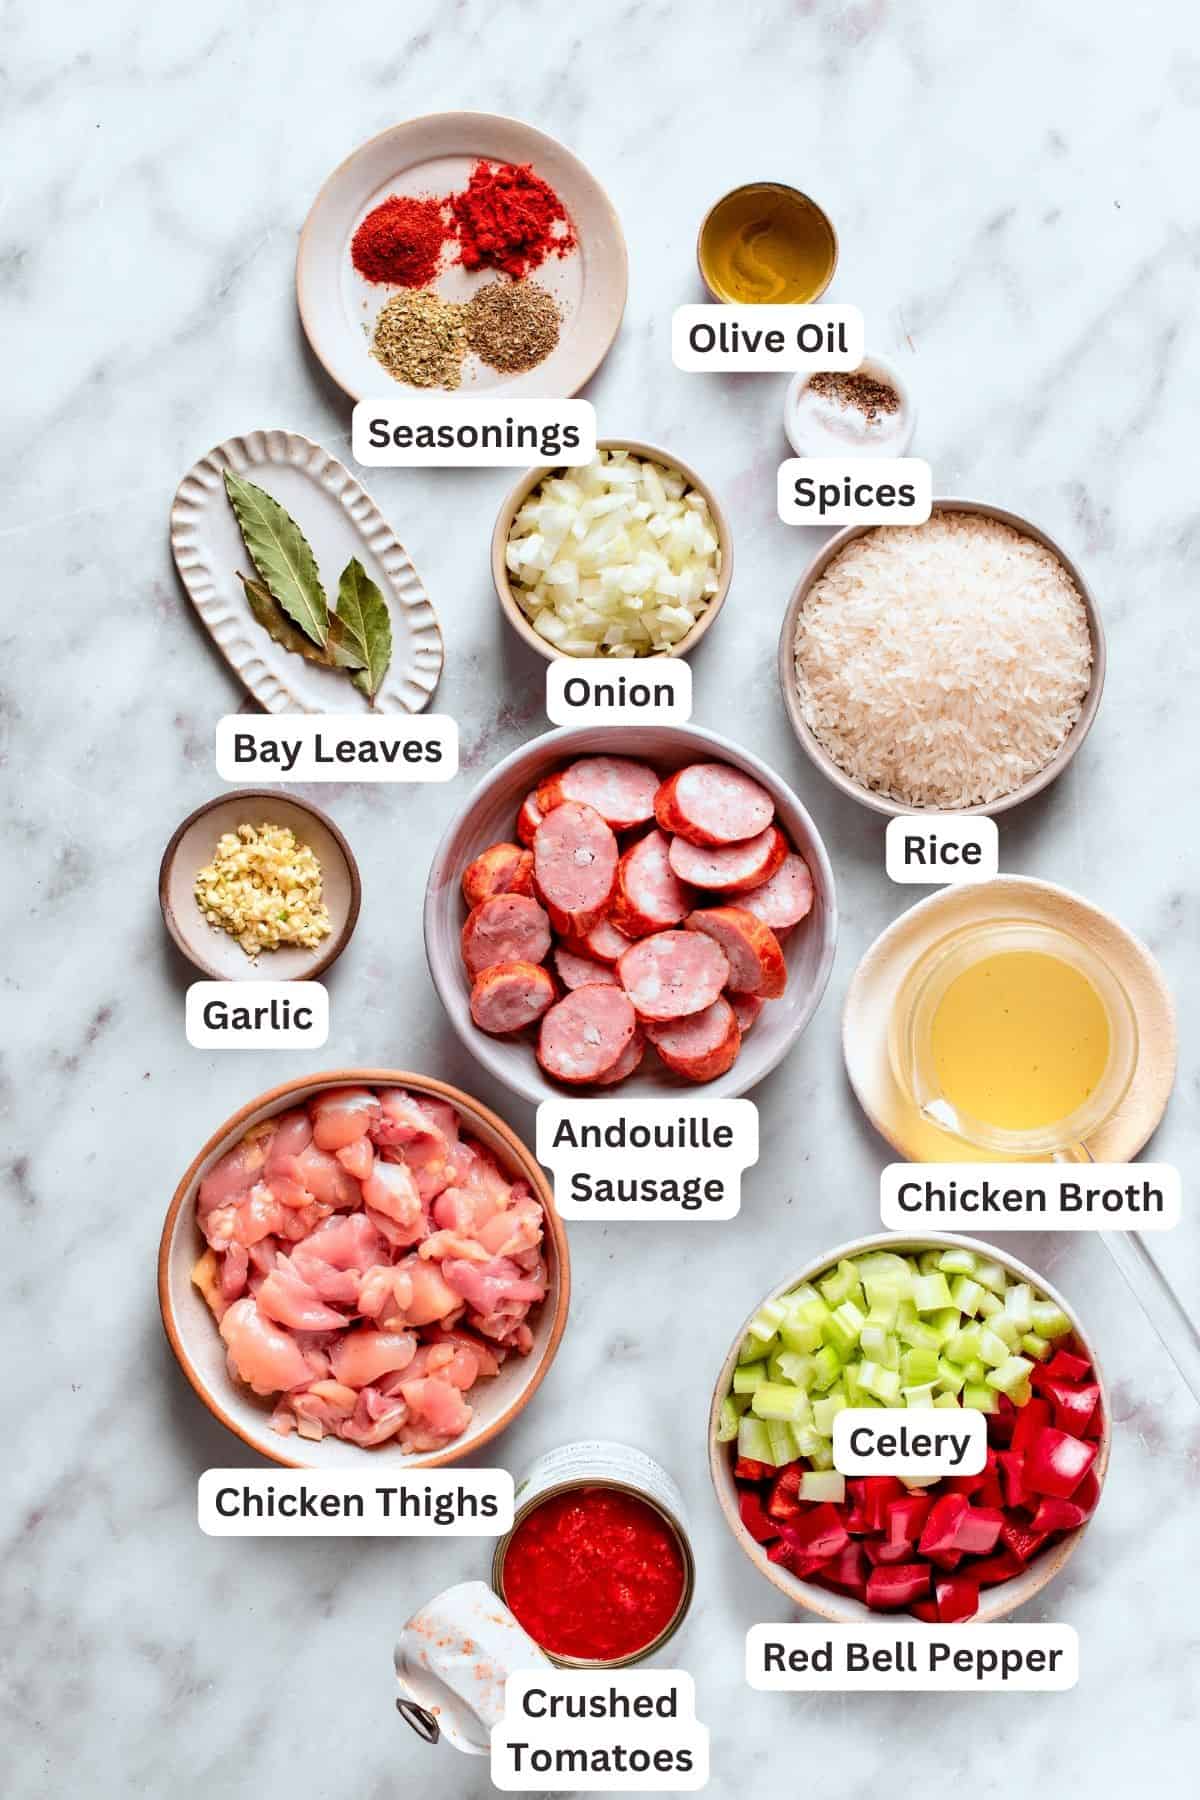 Chicken and sausage jambalaya ingredients are shown labeled: sausage, chicken, rice, garlic, chicken broth, seasonings, spices, olive oil, celery, red bell pepper.